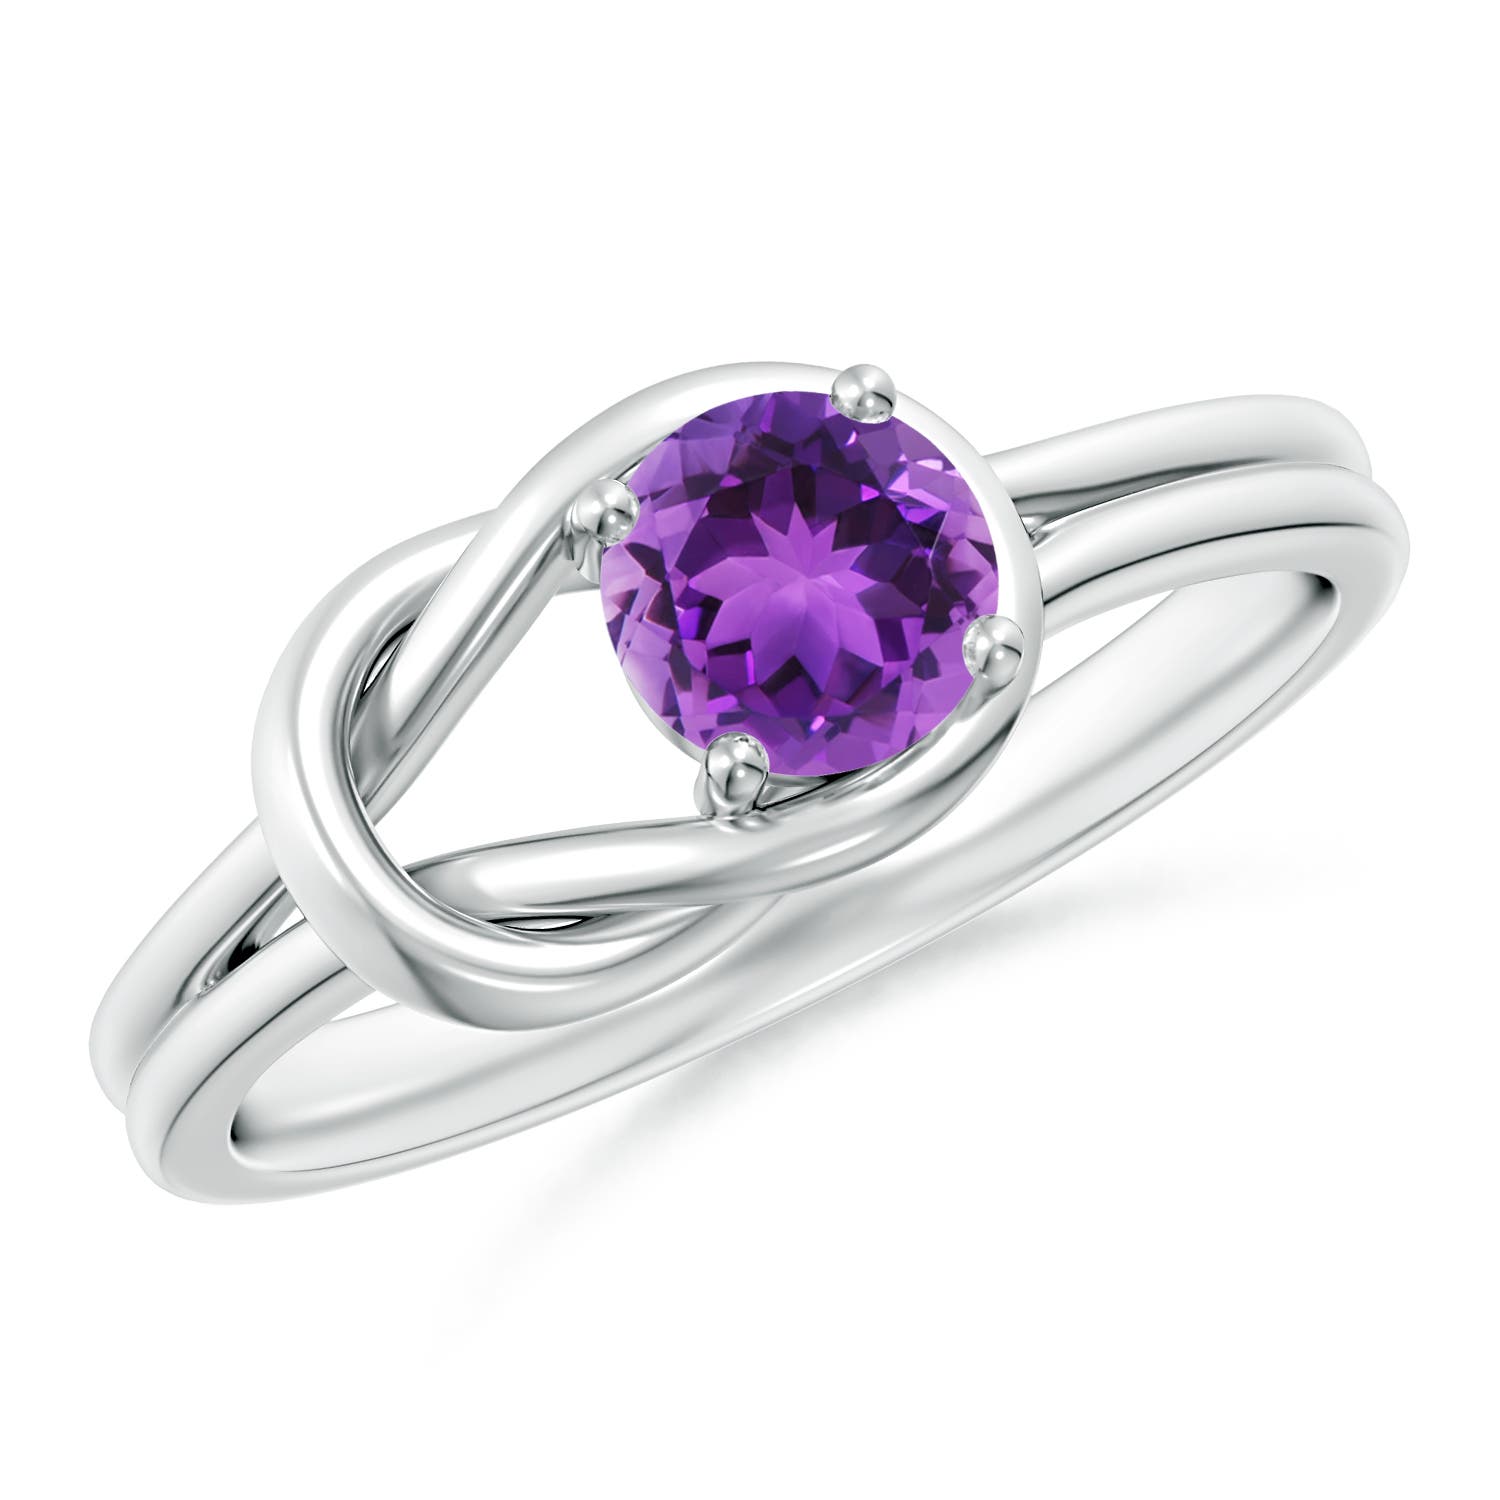 AAA - Amethyst / 0.45 CT / 14 KT White Gold